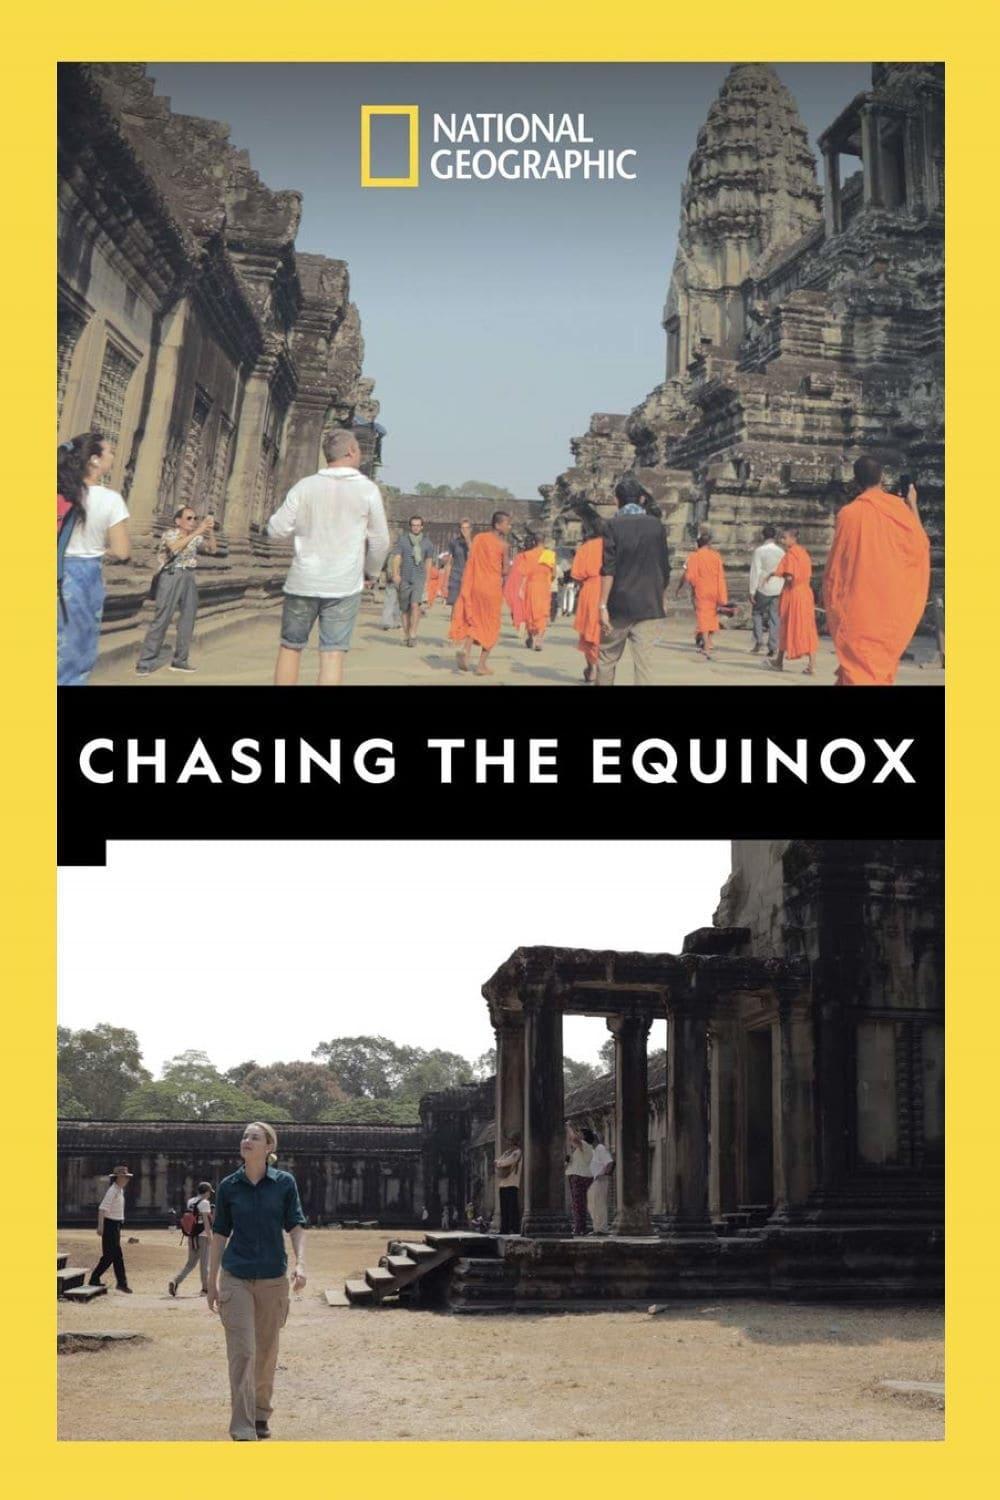 Chasing the Equinox poster